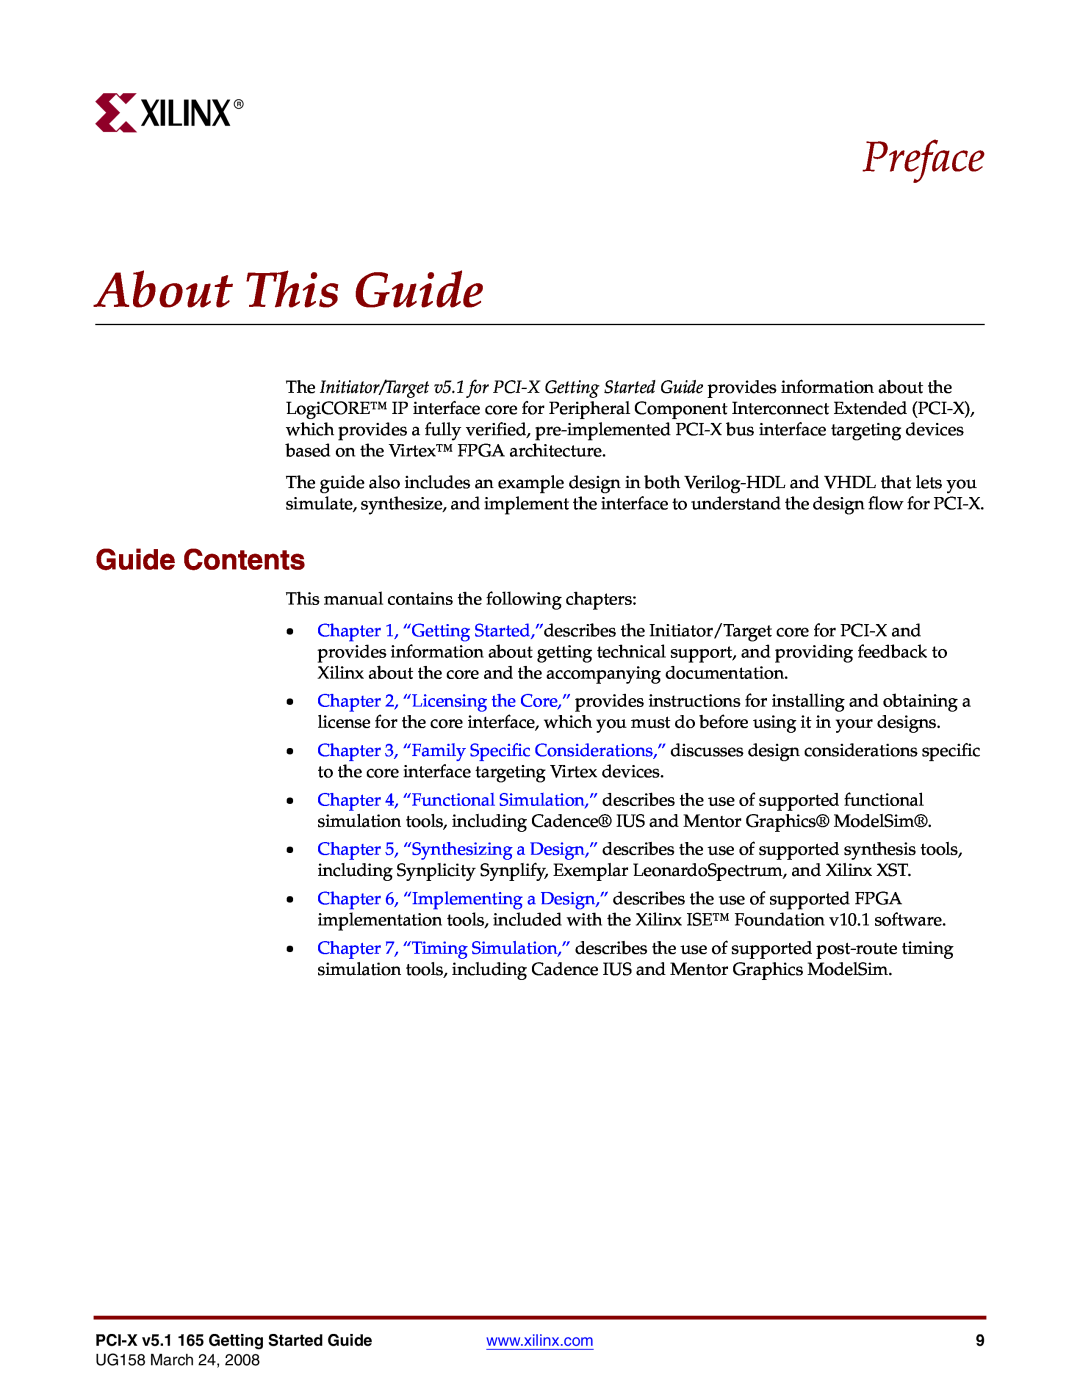 Xilinx PCI-X v5.1 manual About This Guide, Preface, Guide Contents 